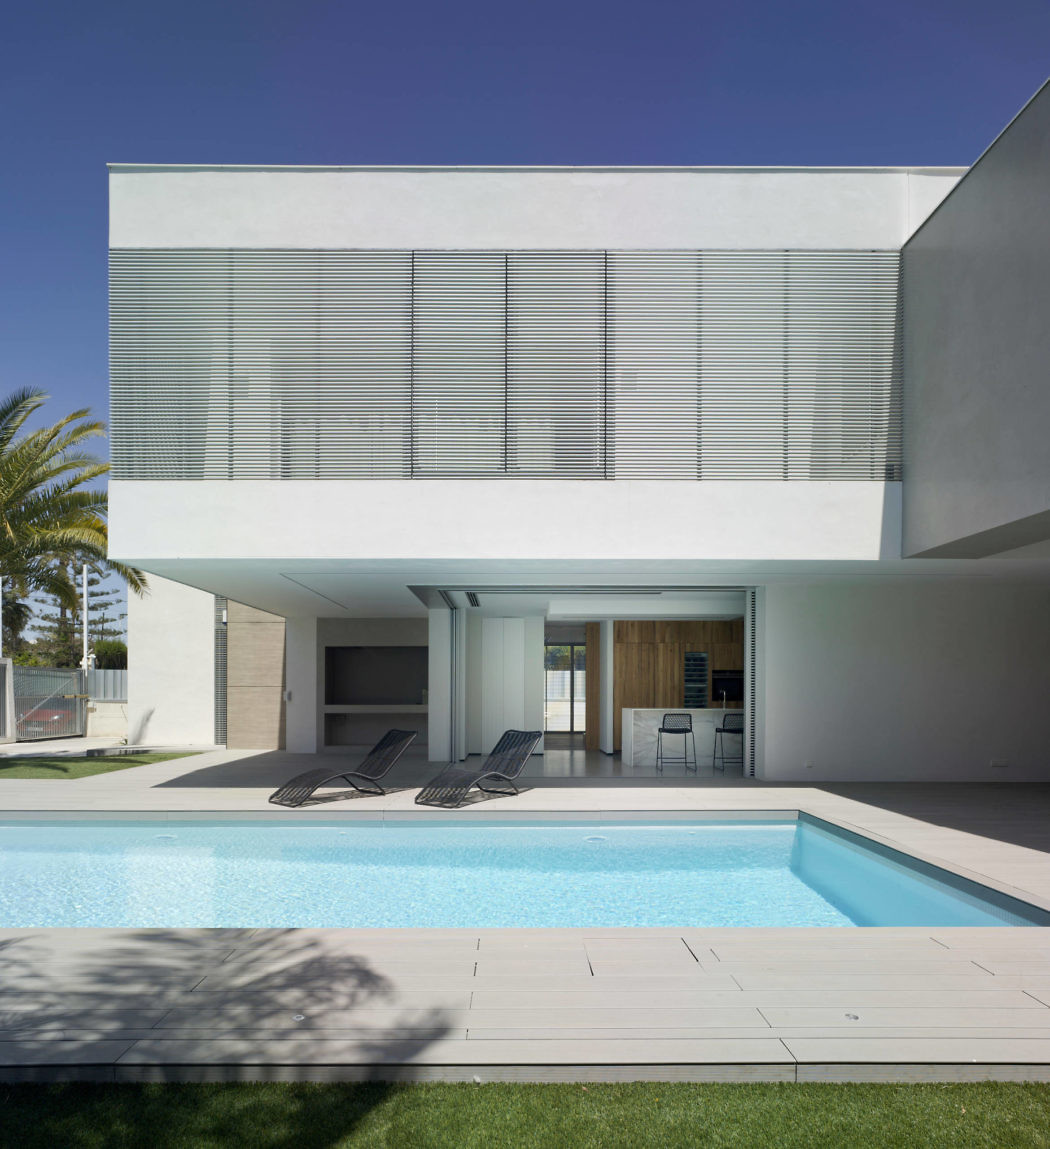 Contemporary home with pool, geometric lines, and minimalist design.